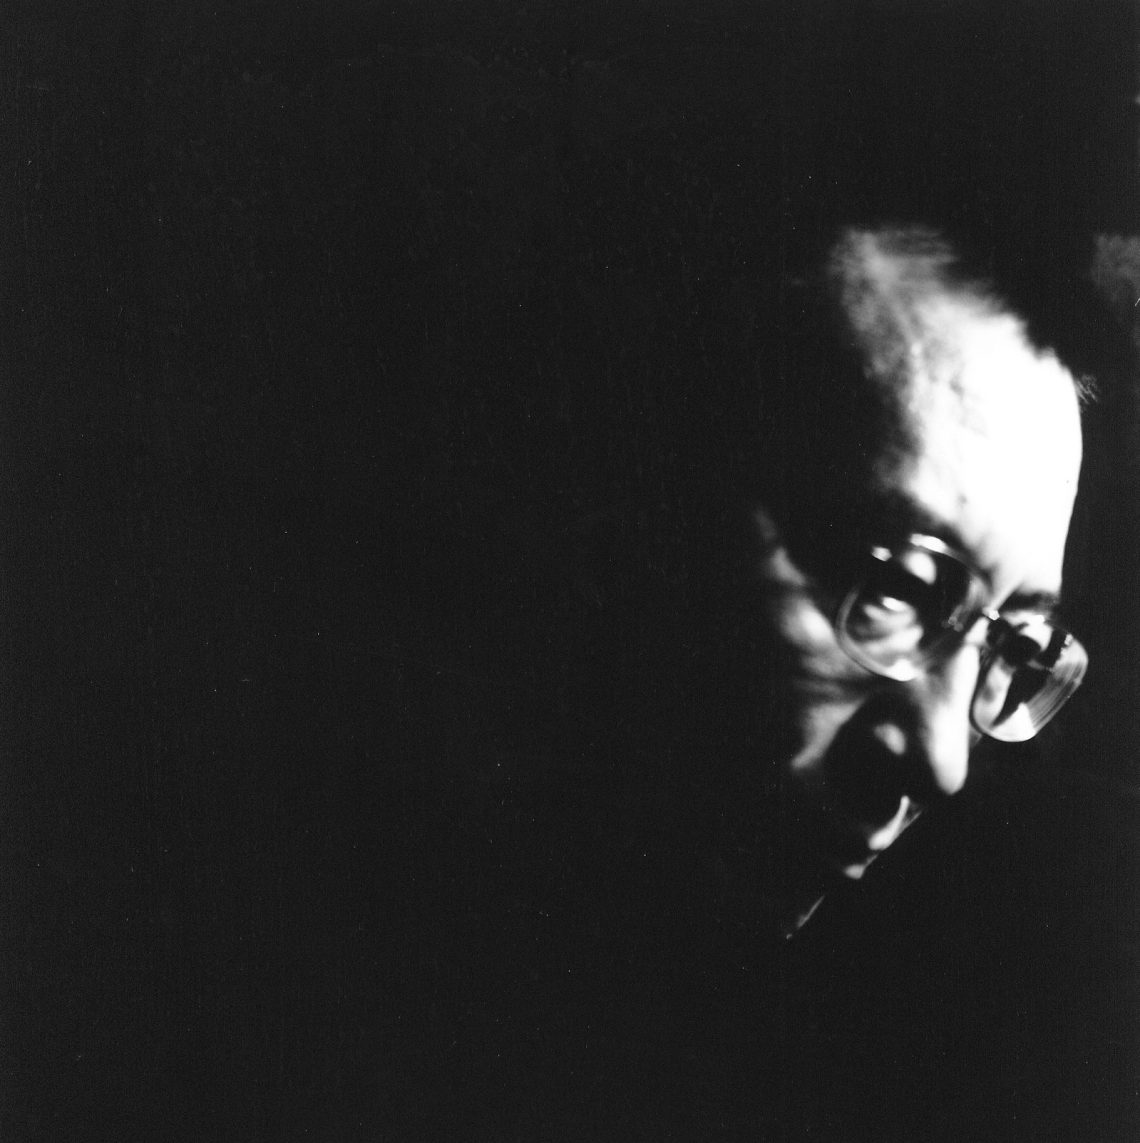 The Passion of Liu Xiaobo